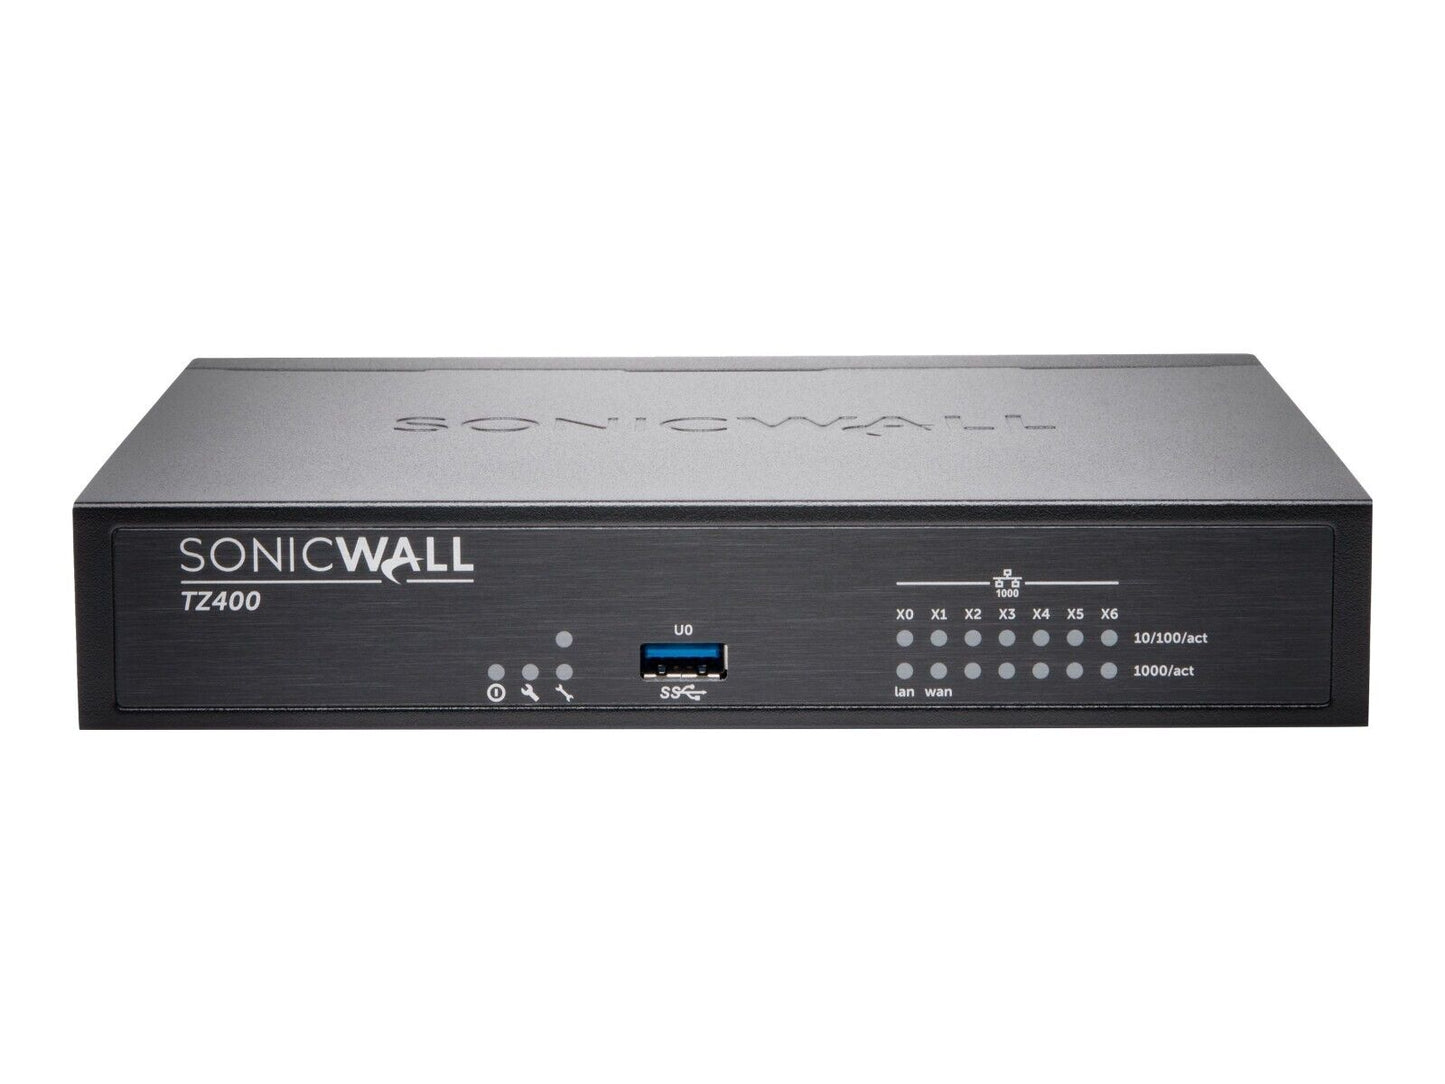 SonicWALL TZ400 Firewall Total Secure - 01-SSC-0514 Used